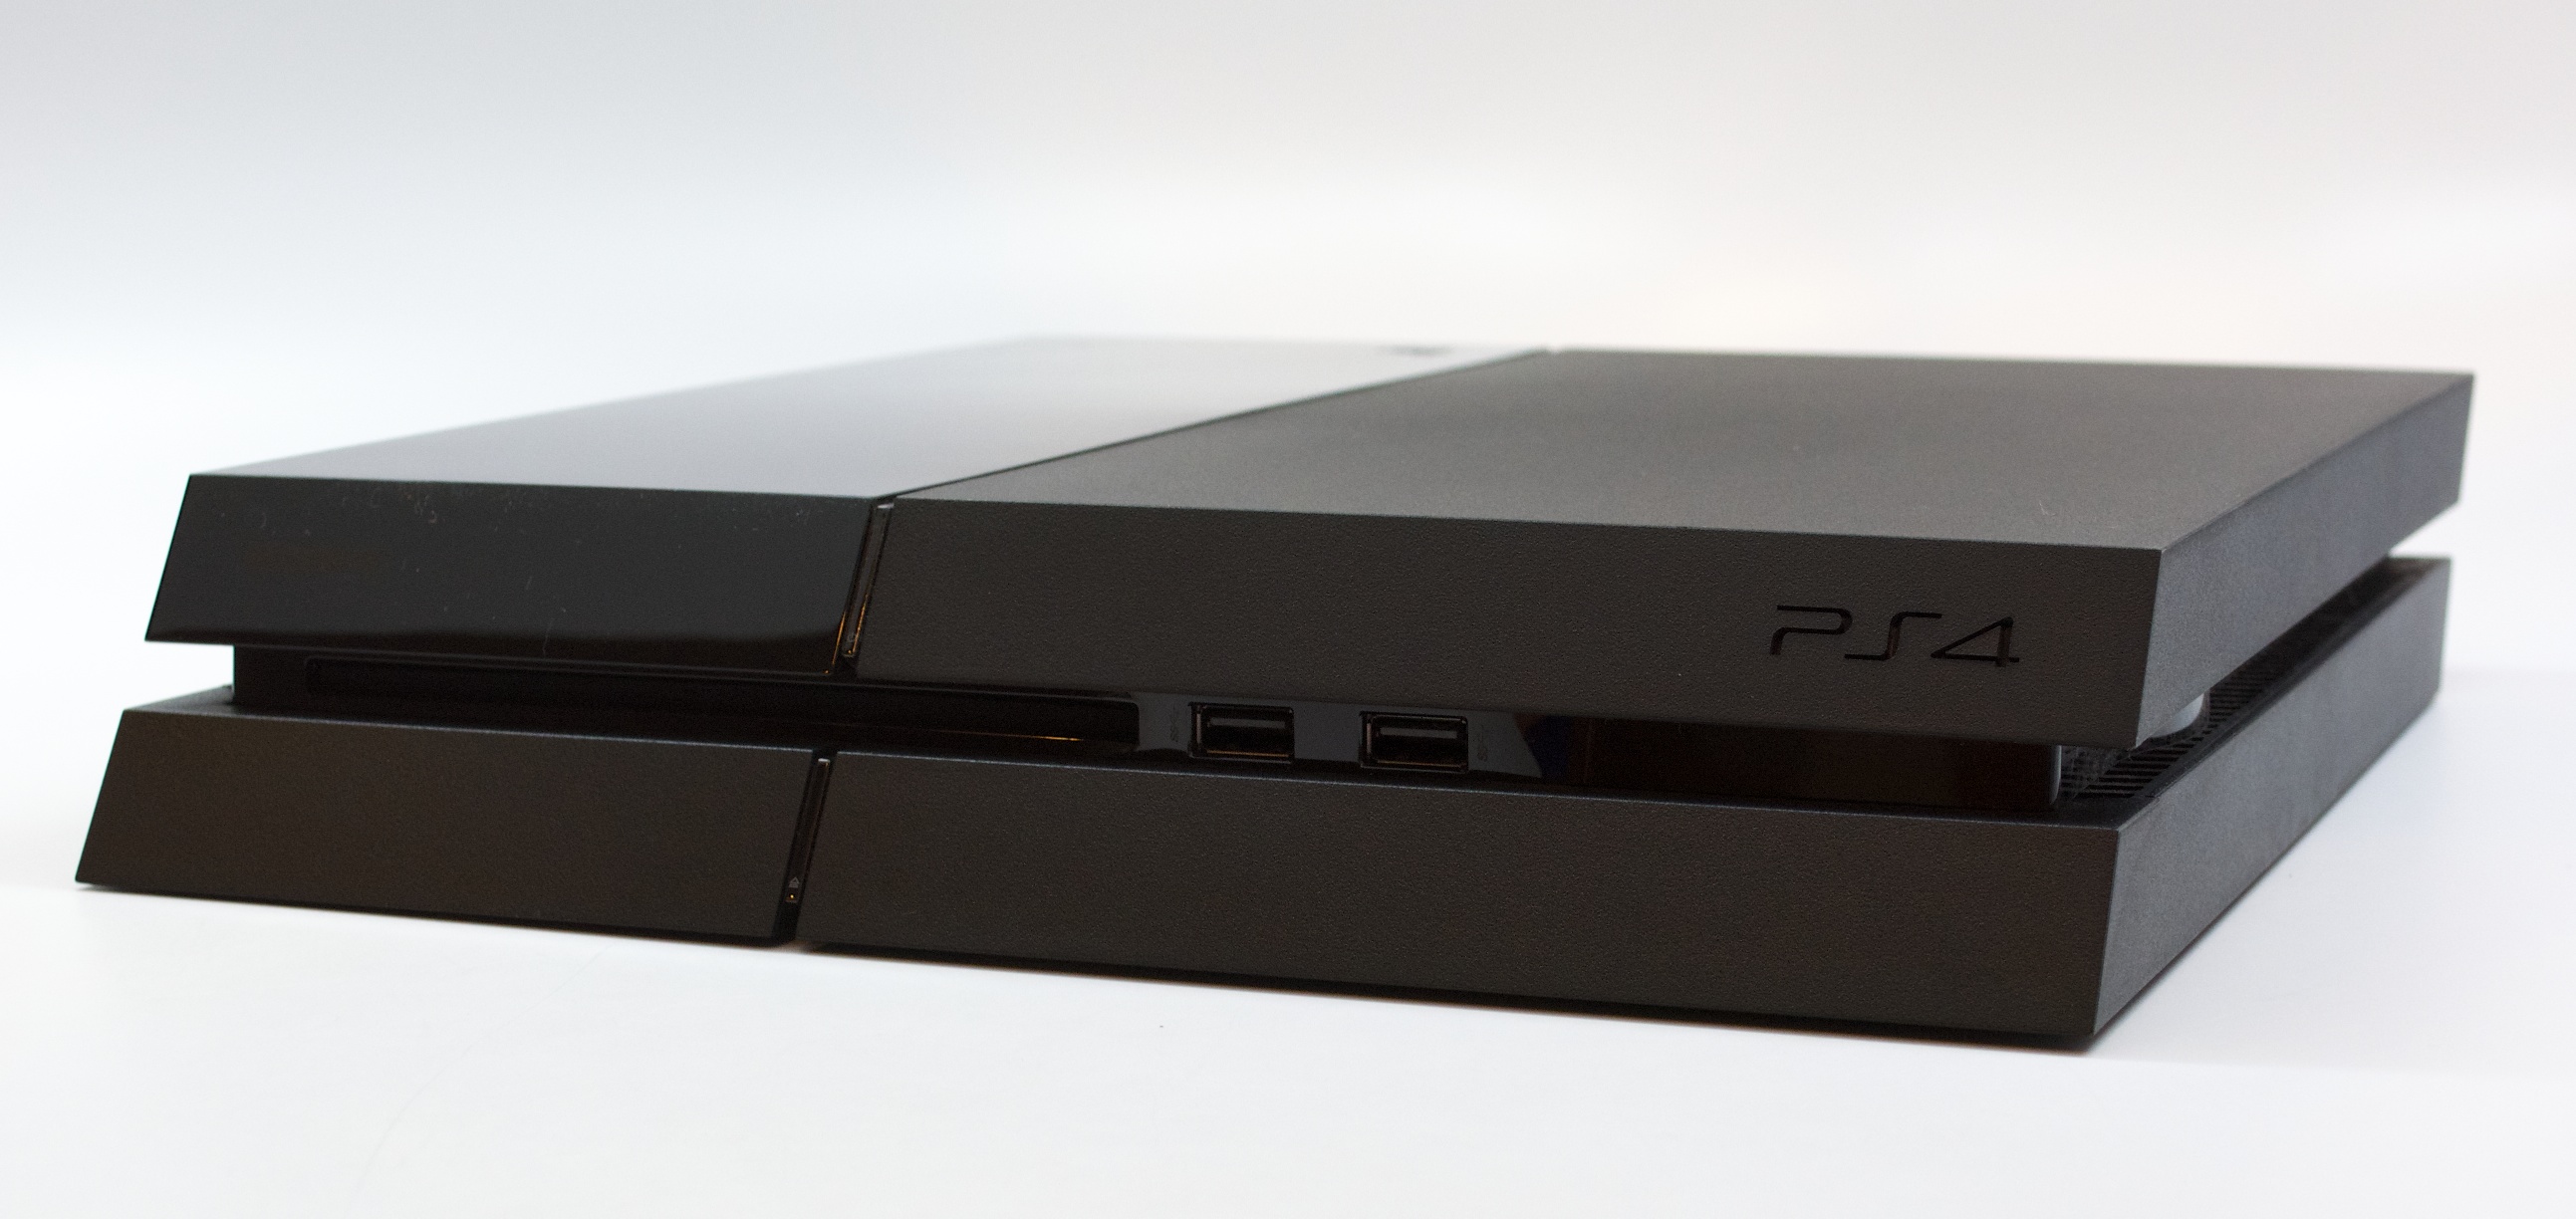 It is time to upgrade to a PS4 or a Xbox One.